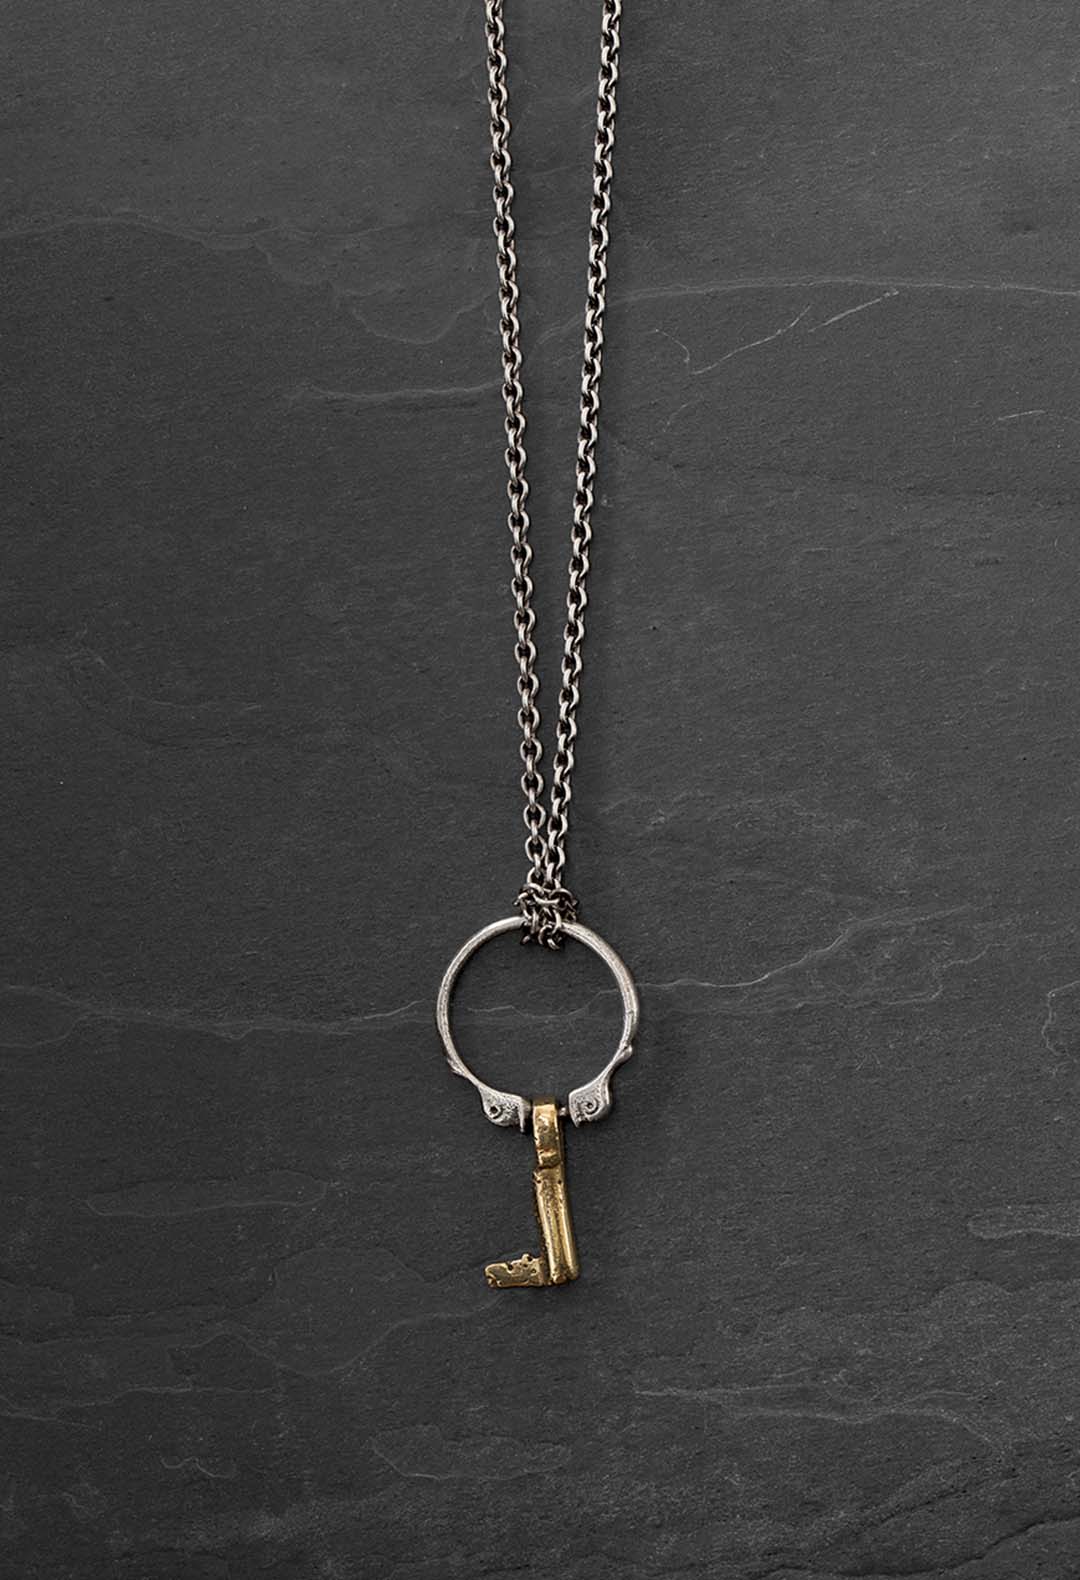 Silver & gold key necklace